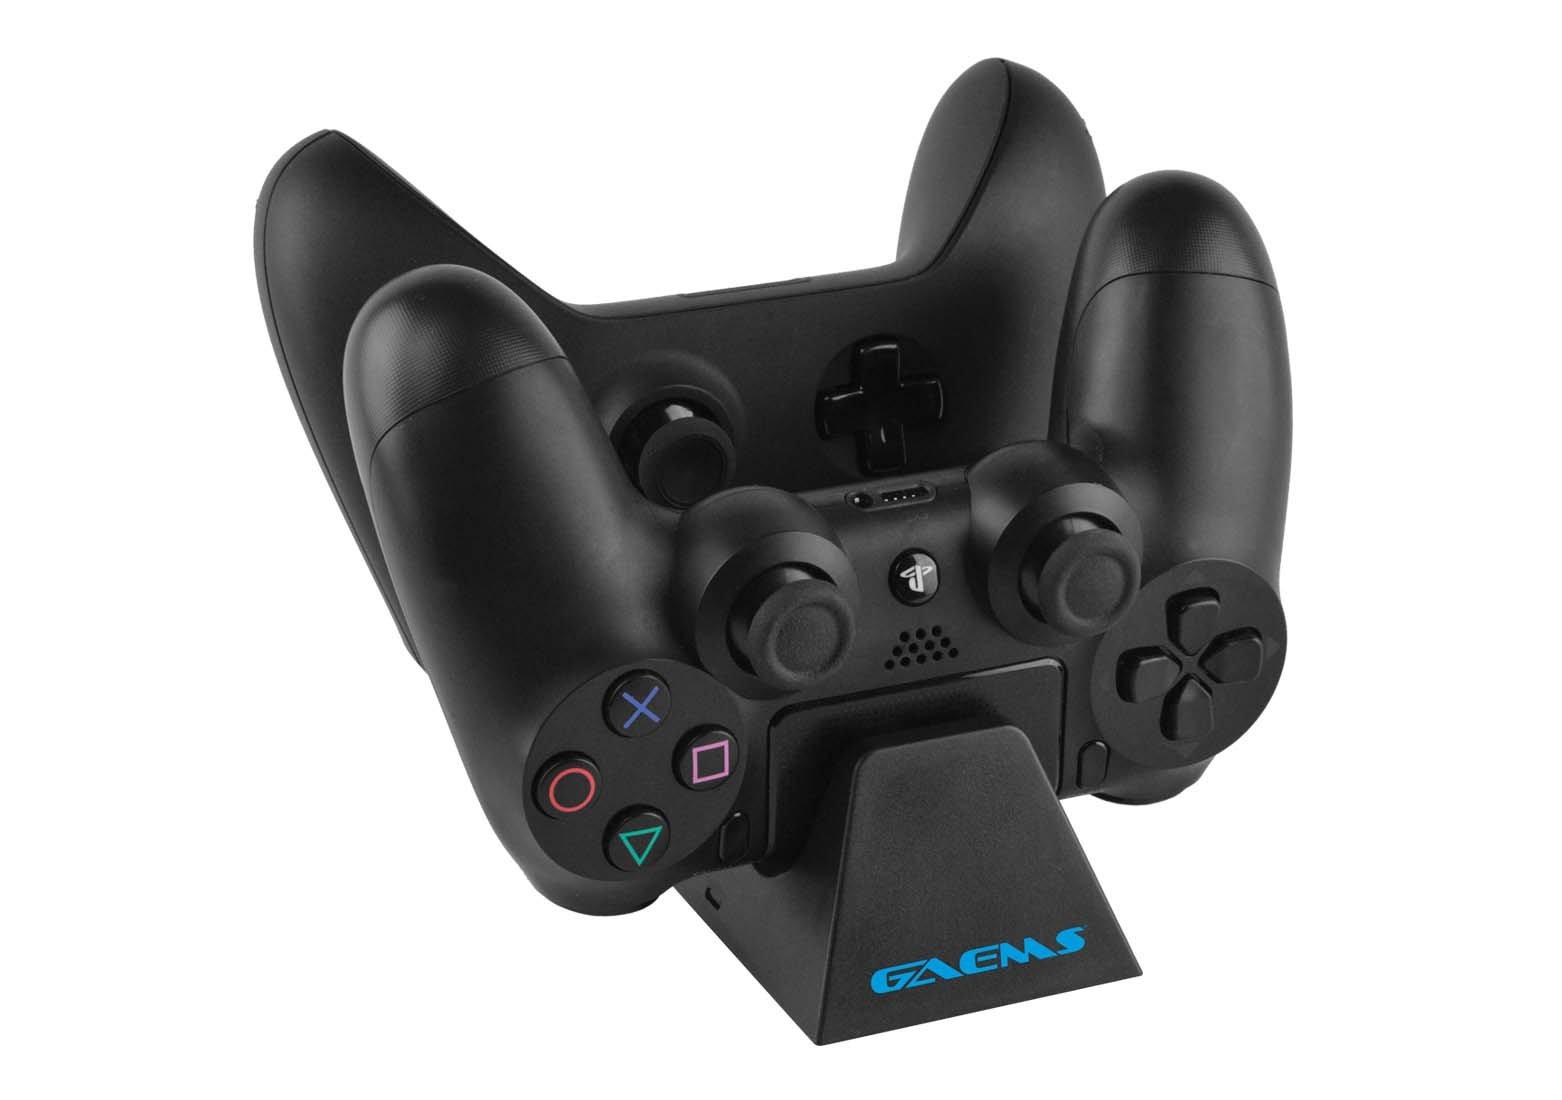 Universal Charge Dock for PlayStation 4 